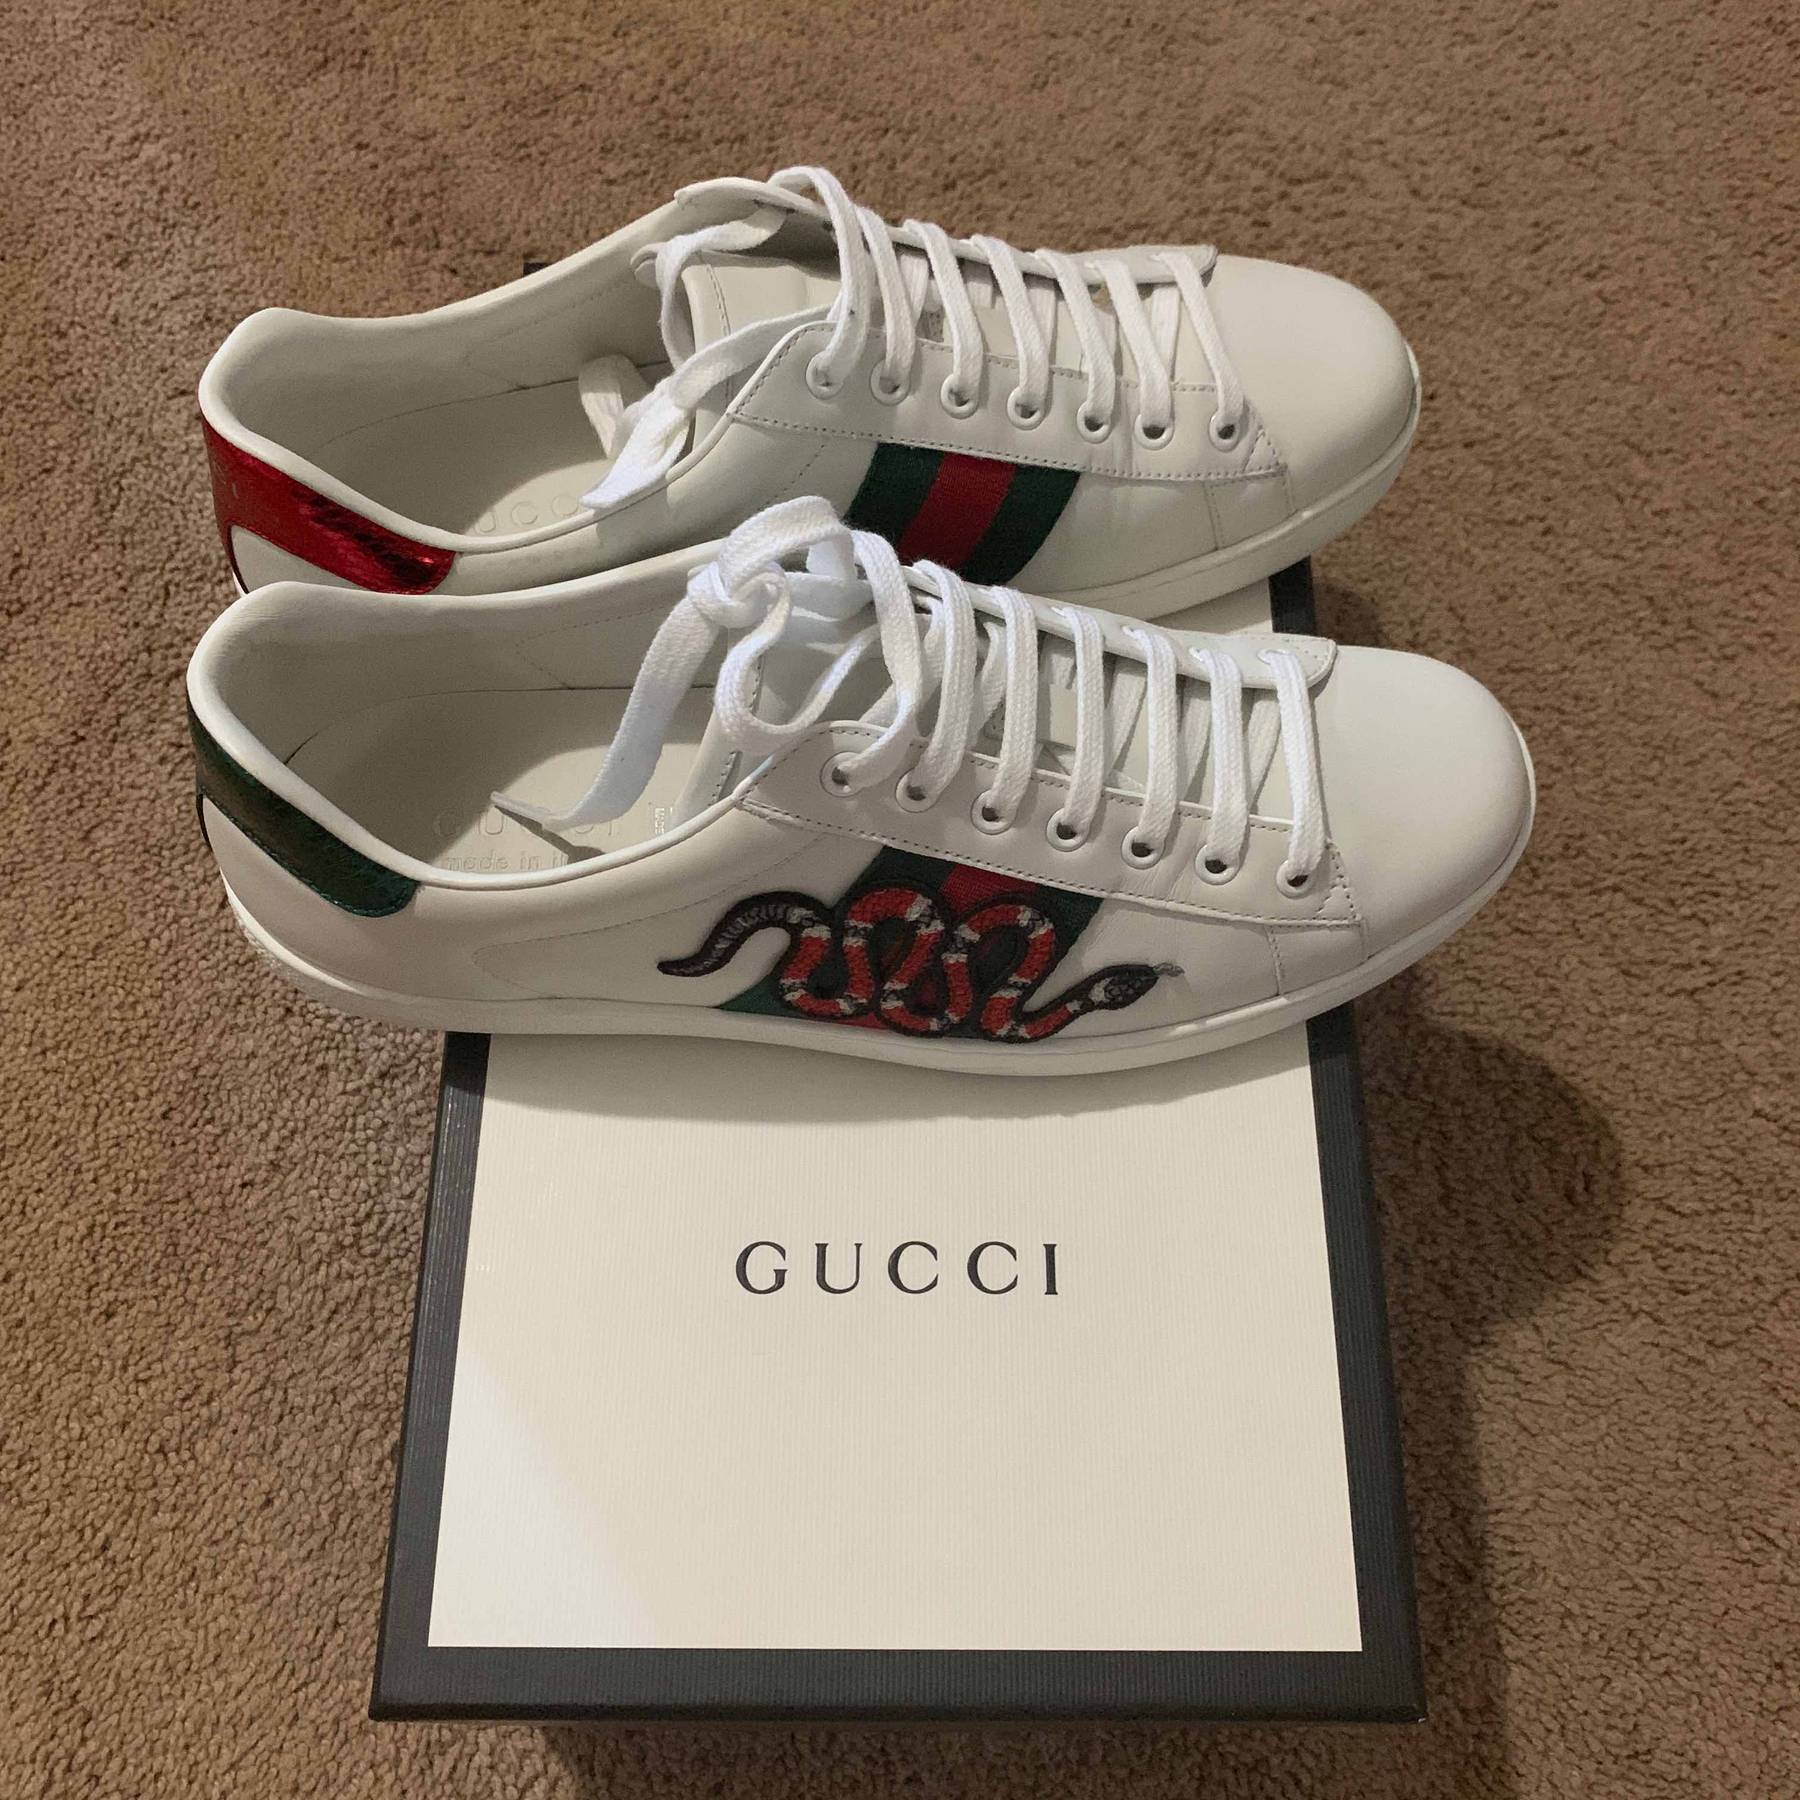 Gucci Ace Embroidered 'Snake' - Gucci - 456230 A38G0 9064 | GOAT